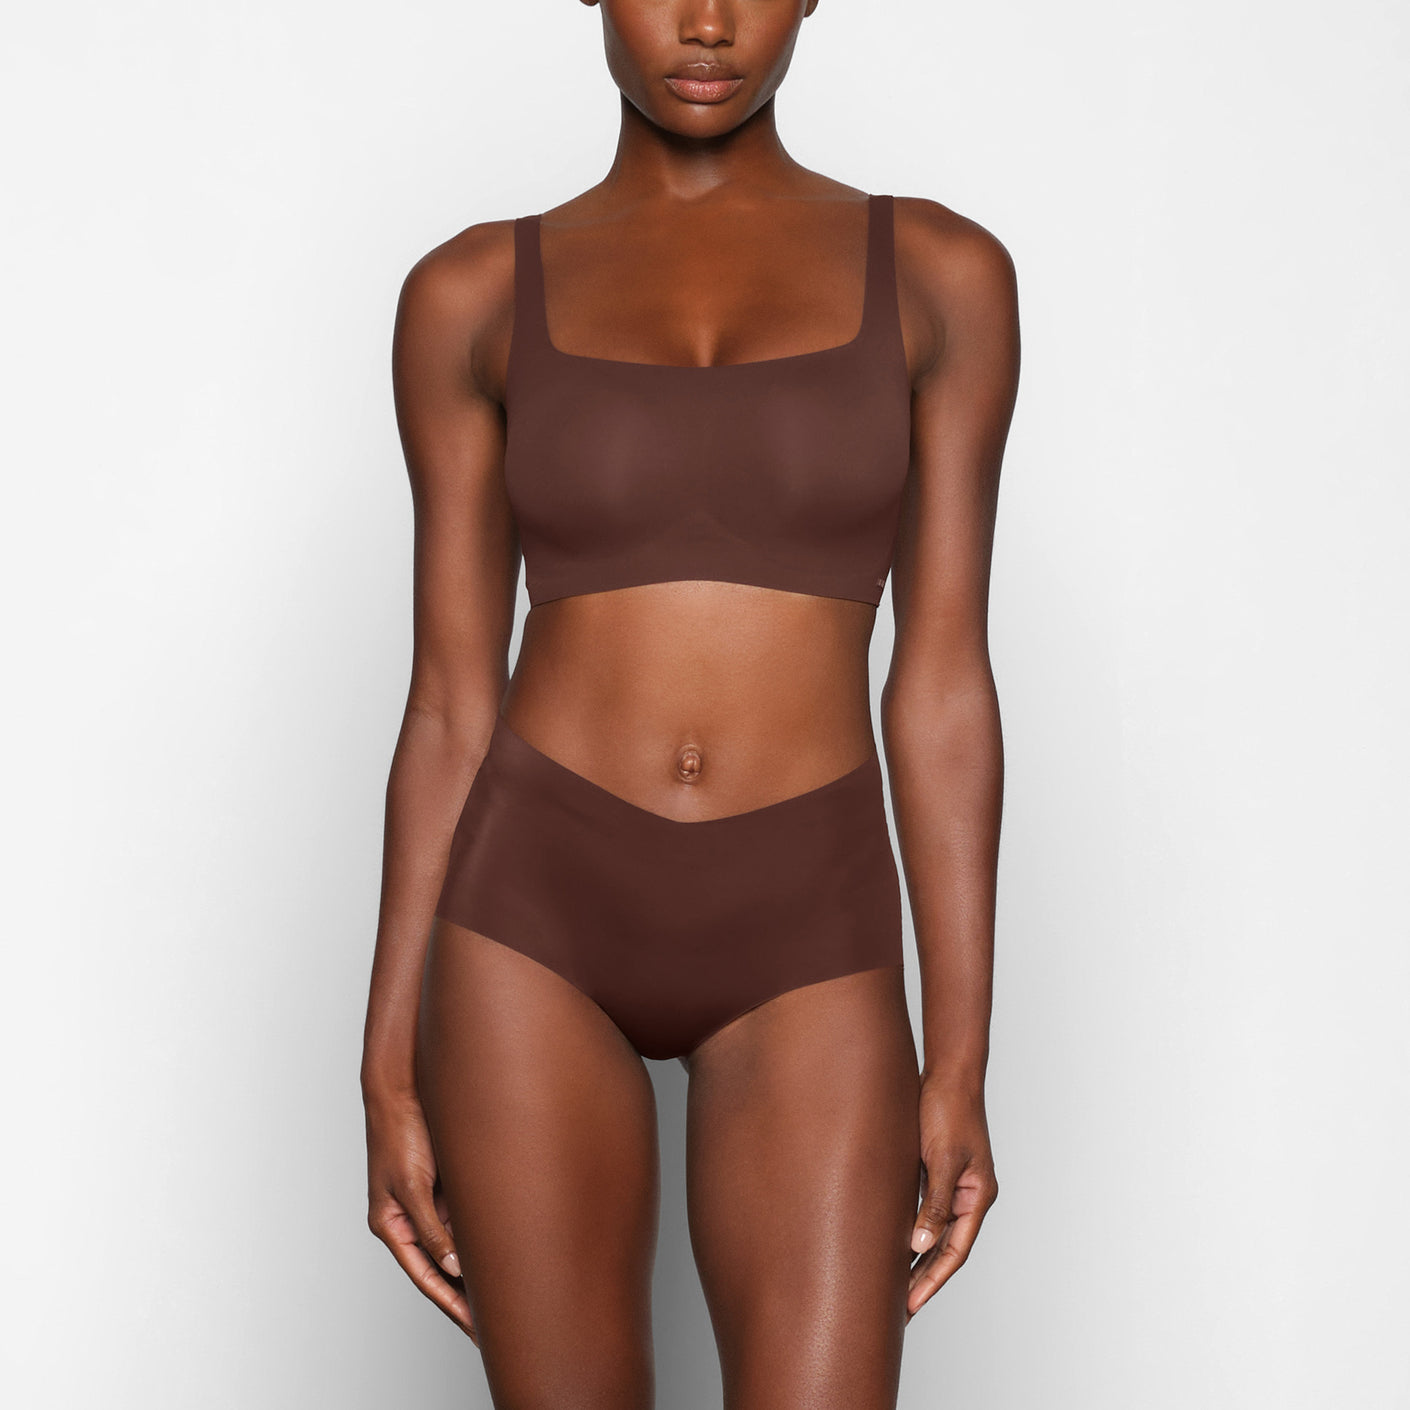 Fits Everybody Scoop Neck Bralette - Cocoa